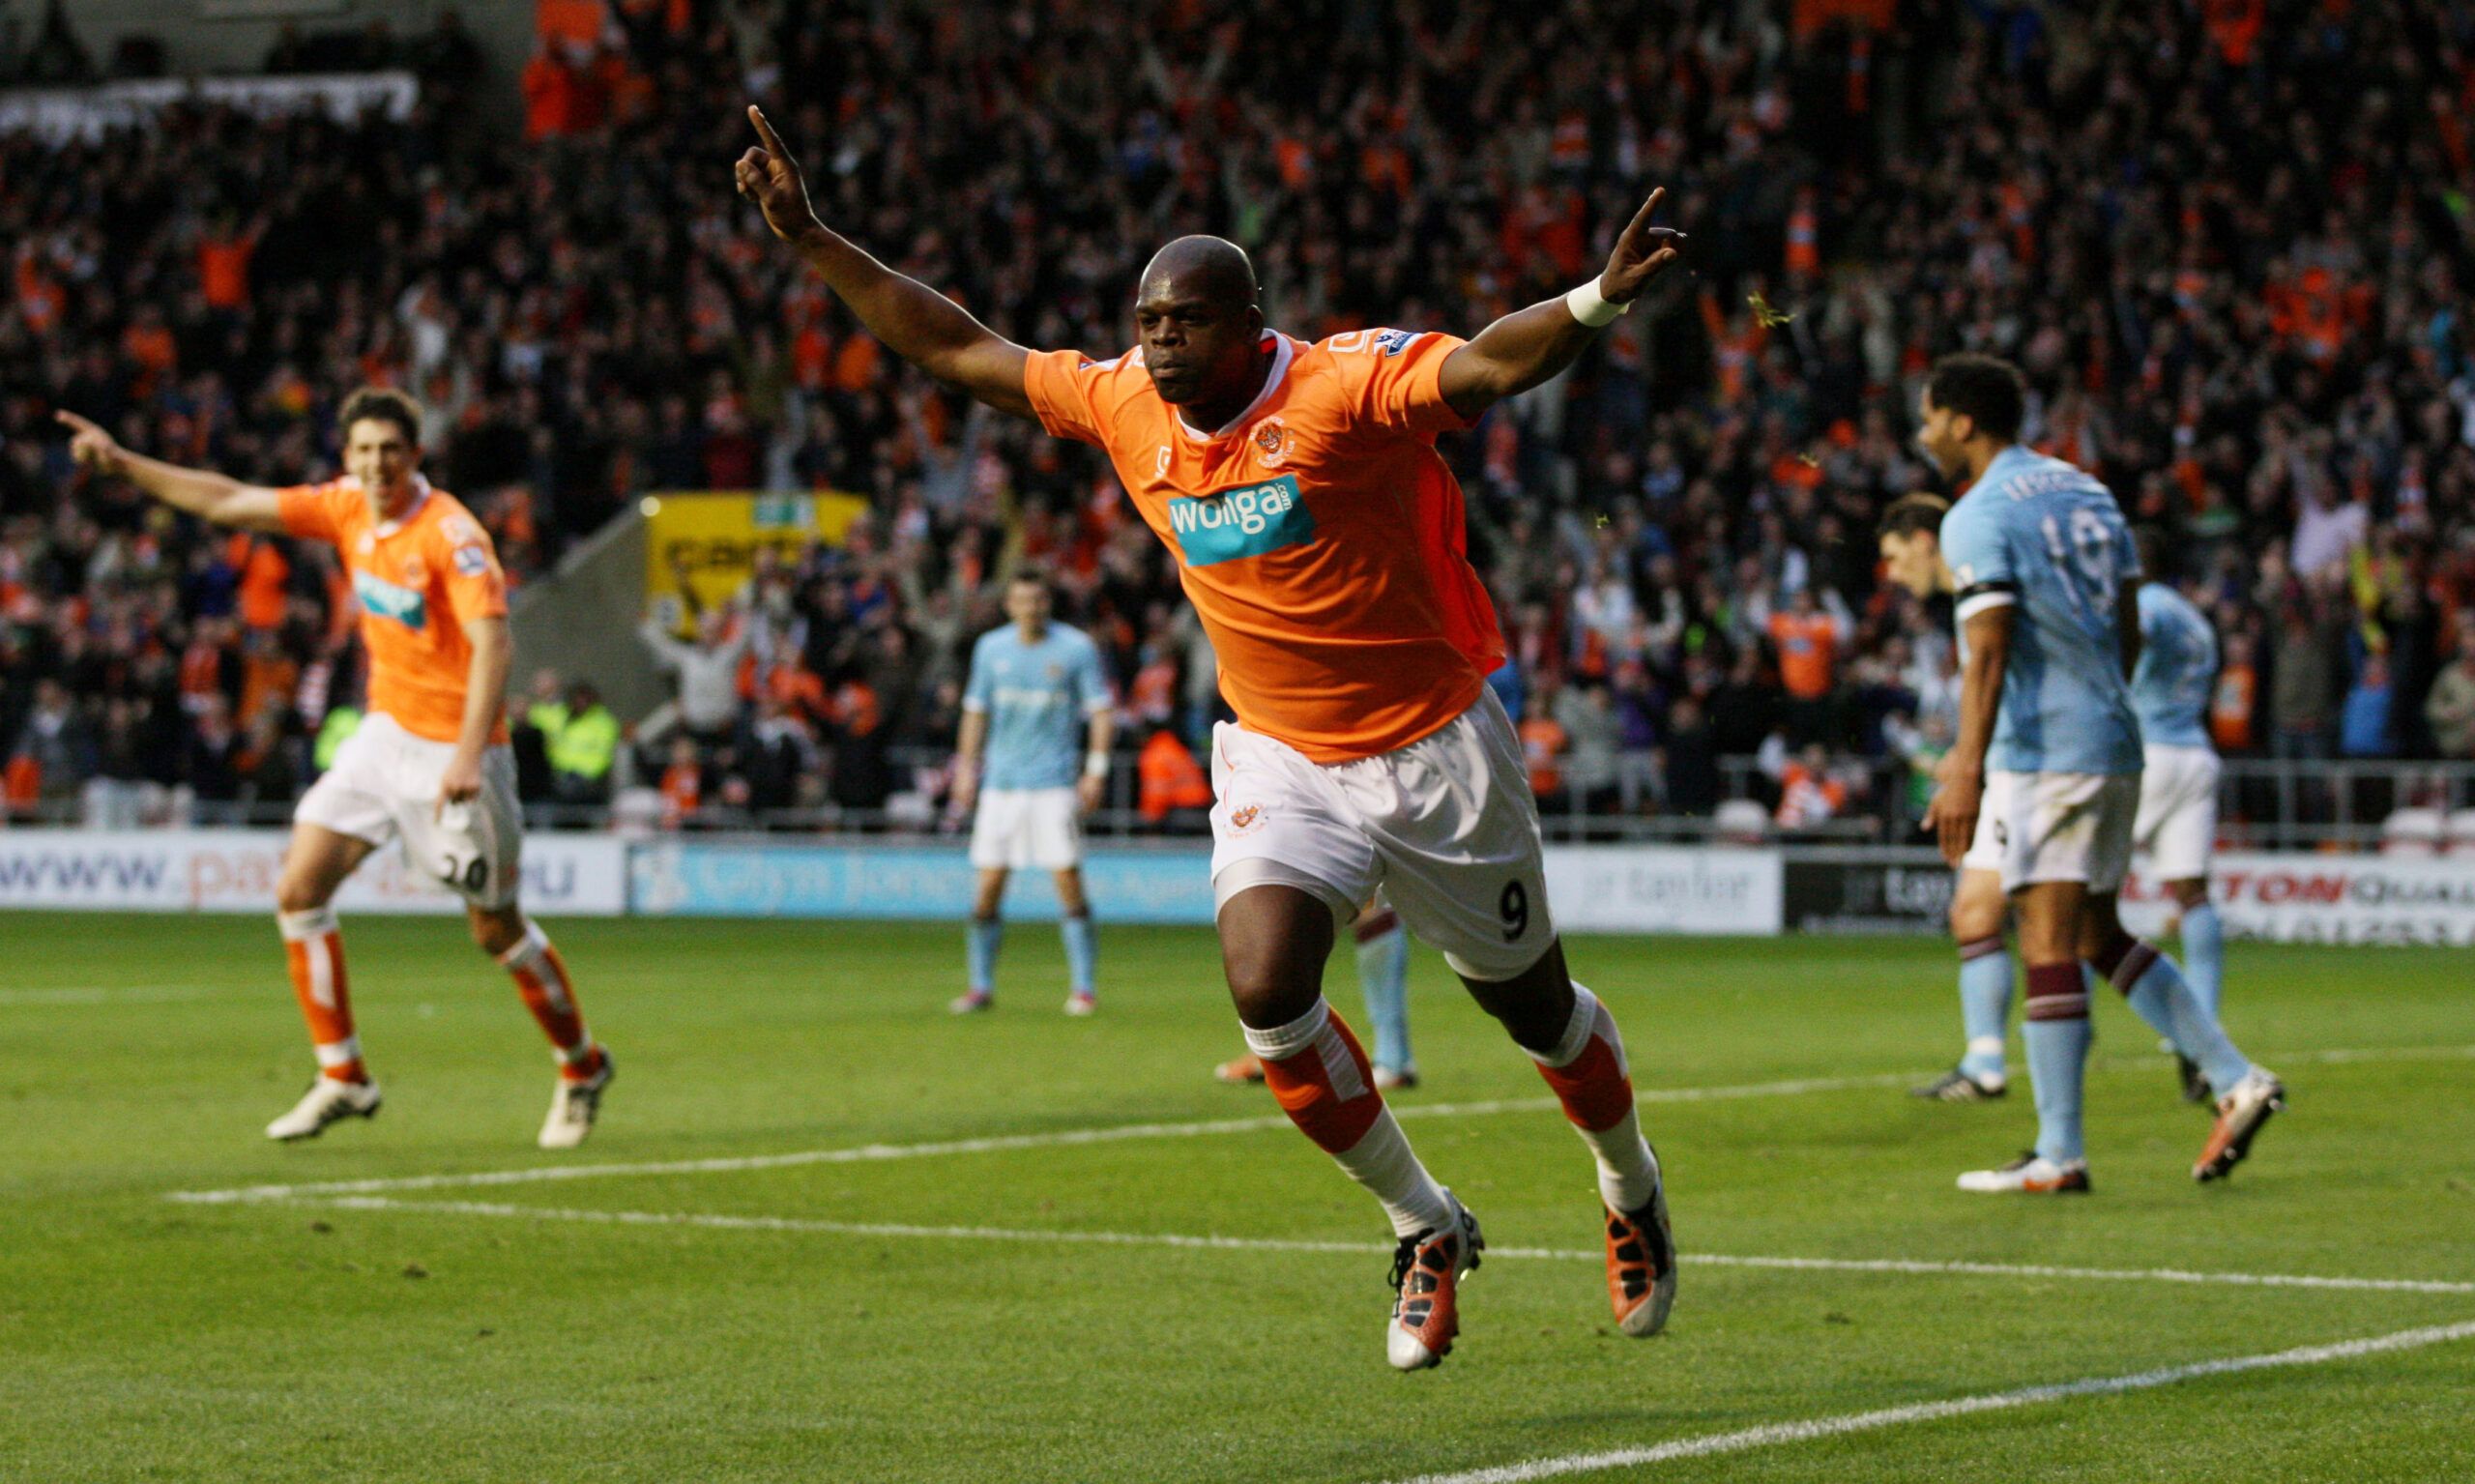 Football - Blackpool v Manchester City Barclays Premier League  - Bloomfield Road  - 10/11 - 17/10/10 
Marlon Harewood celebrates after scoring the first goal for Blackpool 
Mandatory Credit: Action Images / Lee Smith 
Livepic 
NO ONLINE/INTERNET USE WITHOUT A LICENCE FROM THE FOOTBALL DATA CO LTD. FOR LICENCE ENQUIRIES PLEASE TELEPHONE +44 (0) 207 864 9000.